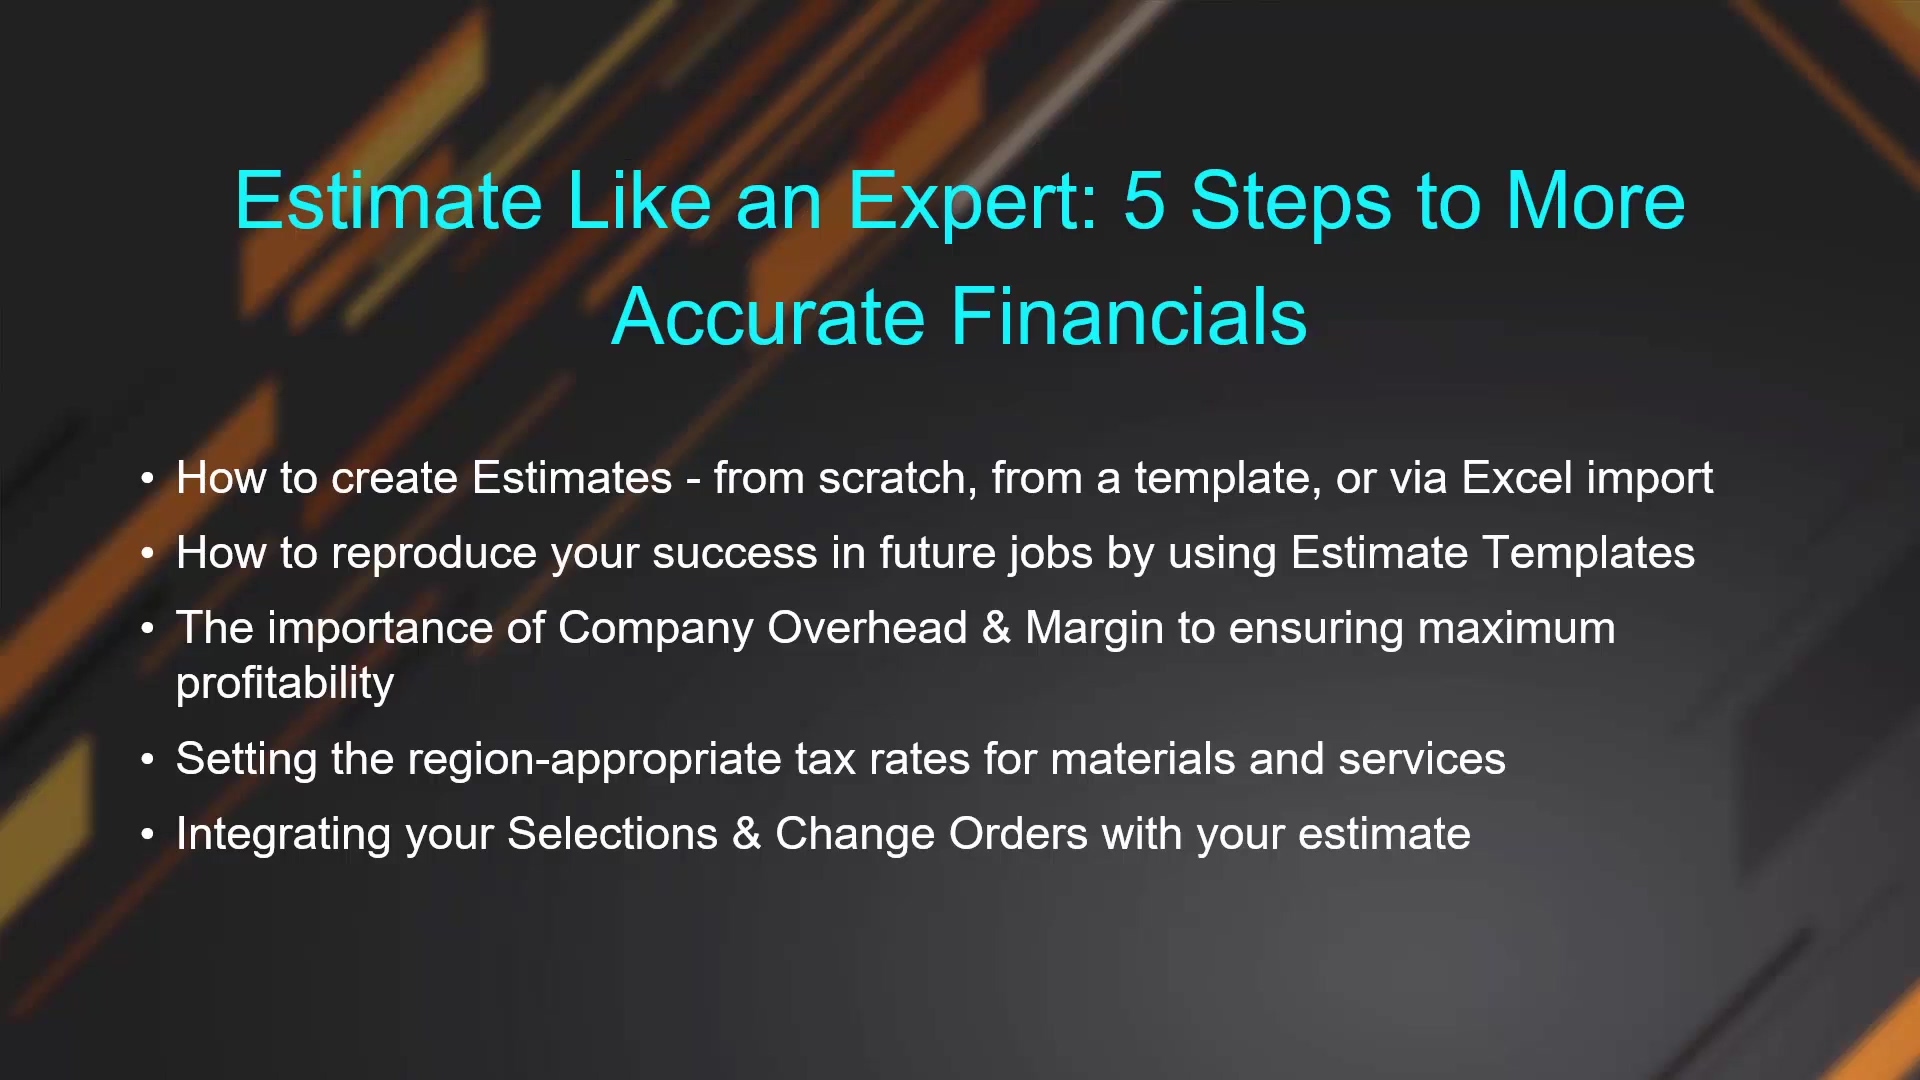 Estimate Like an Expert - 5 Steps to More Accurate Financials_2